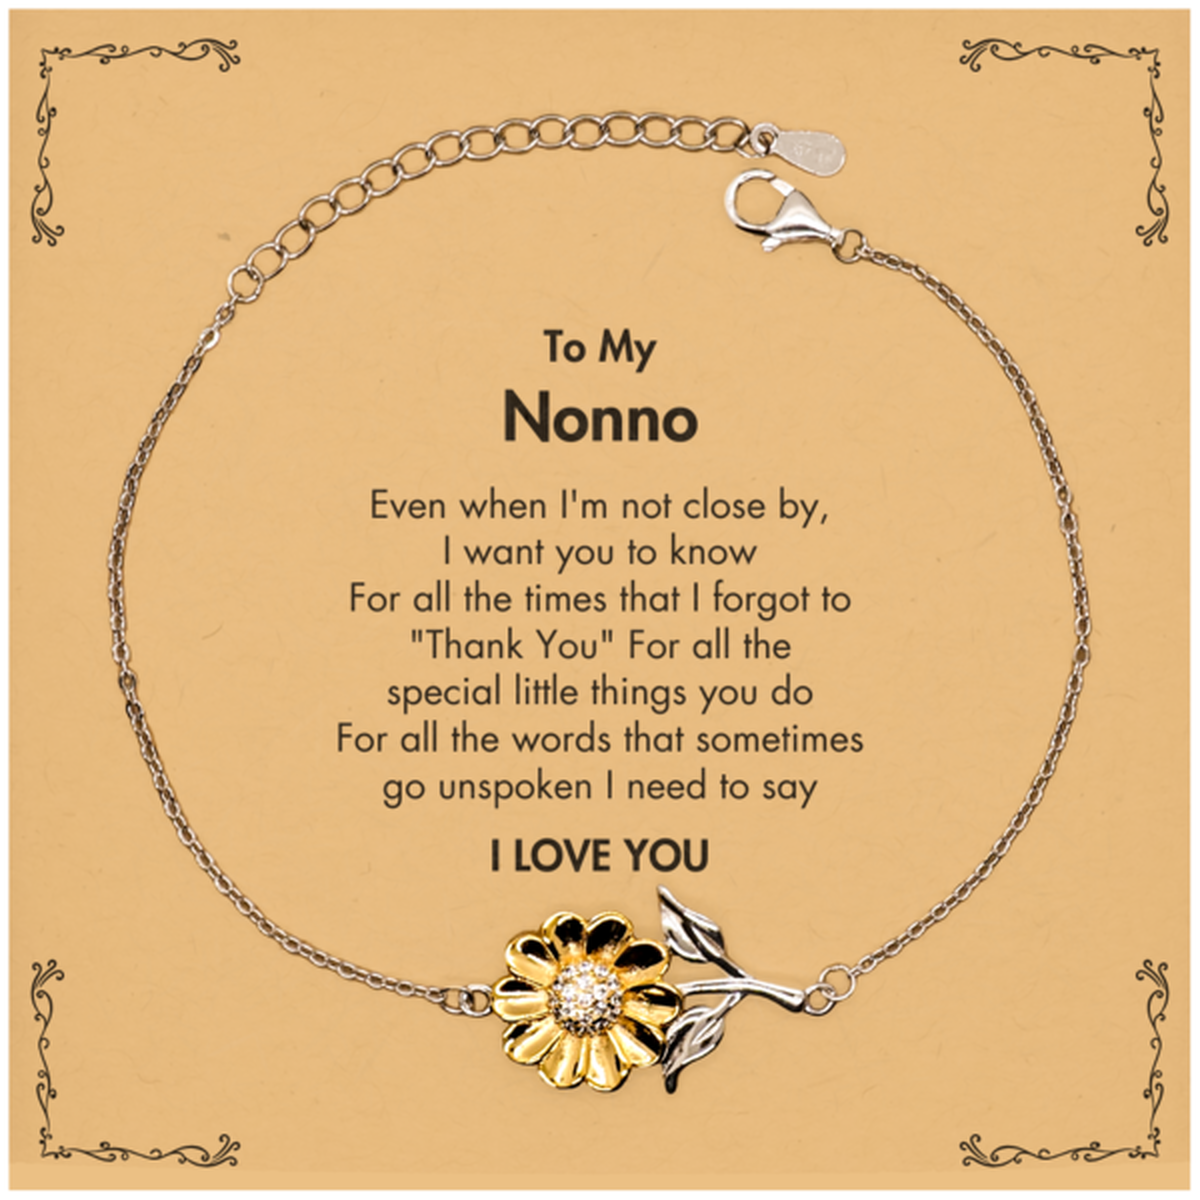 Thank You Gifts for Nonno, Keepsake Sunflower Bracelet Gifts for Nonno Birthday Mother's day Father's Day Nonno For all the words That sometimes go unspoken I need to say I LOVE YOU